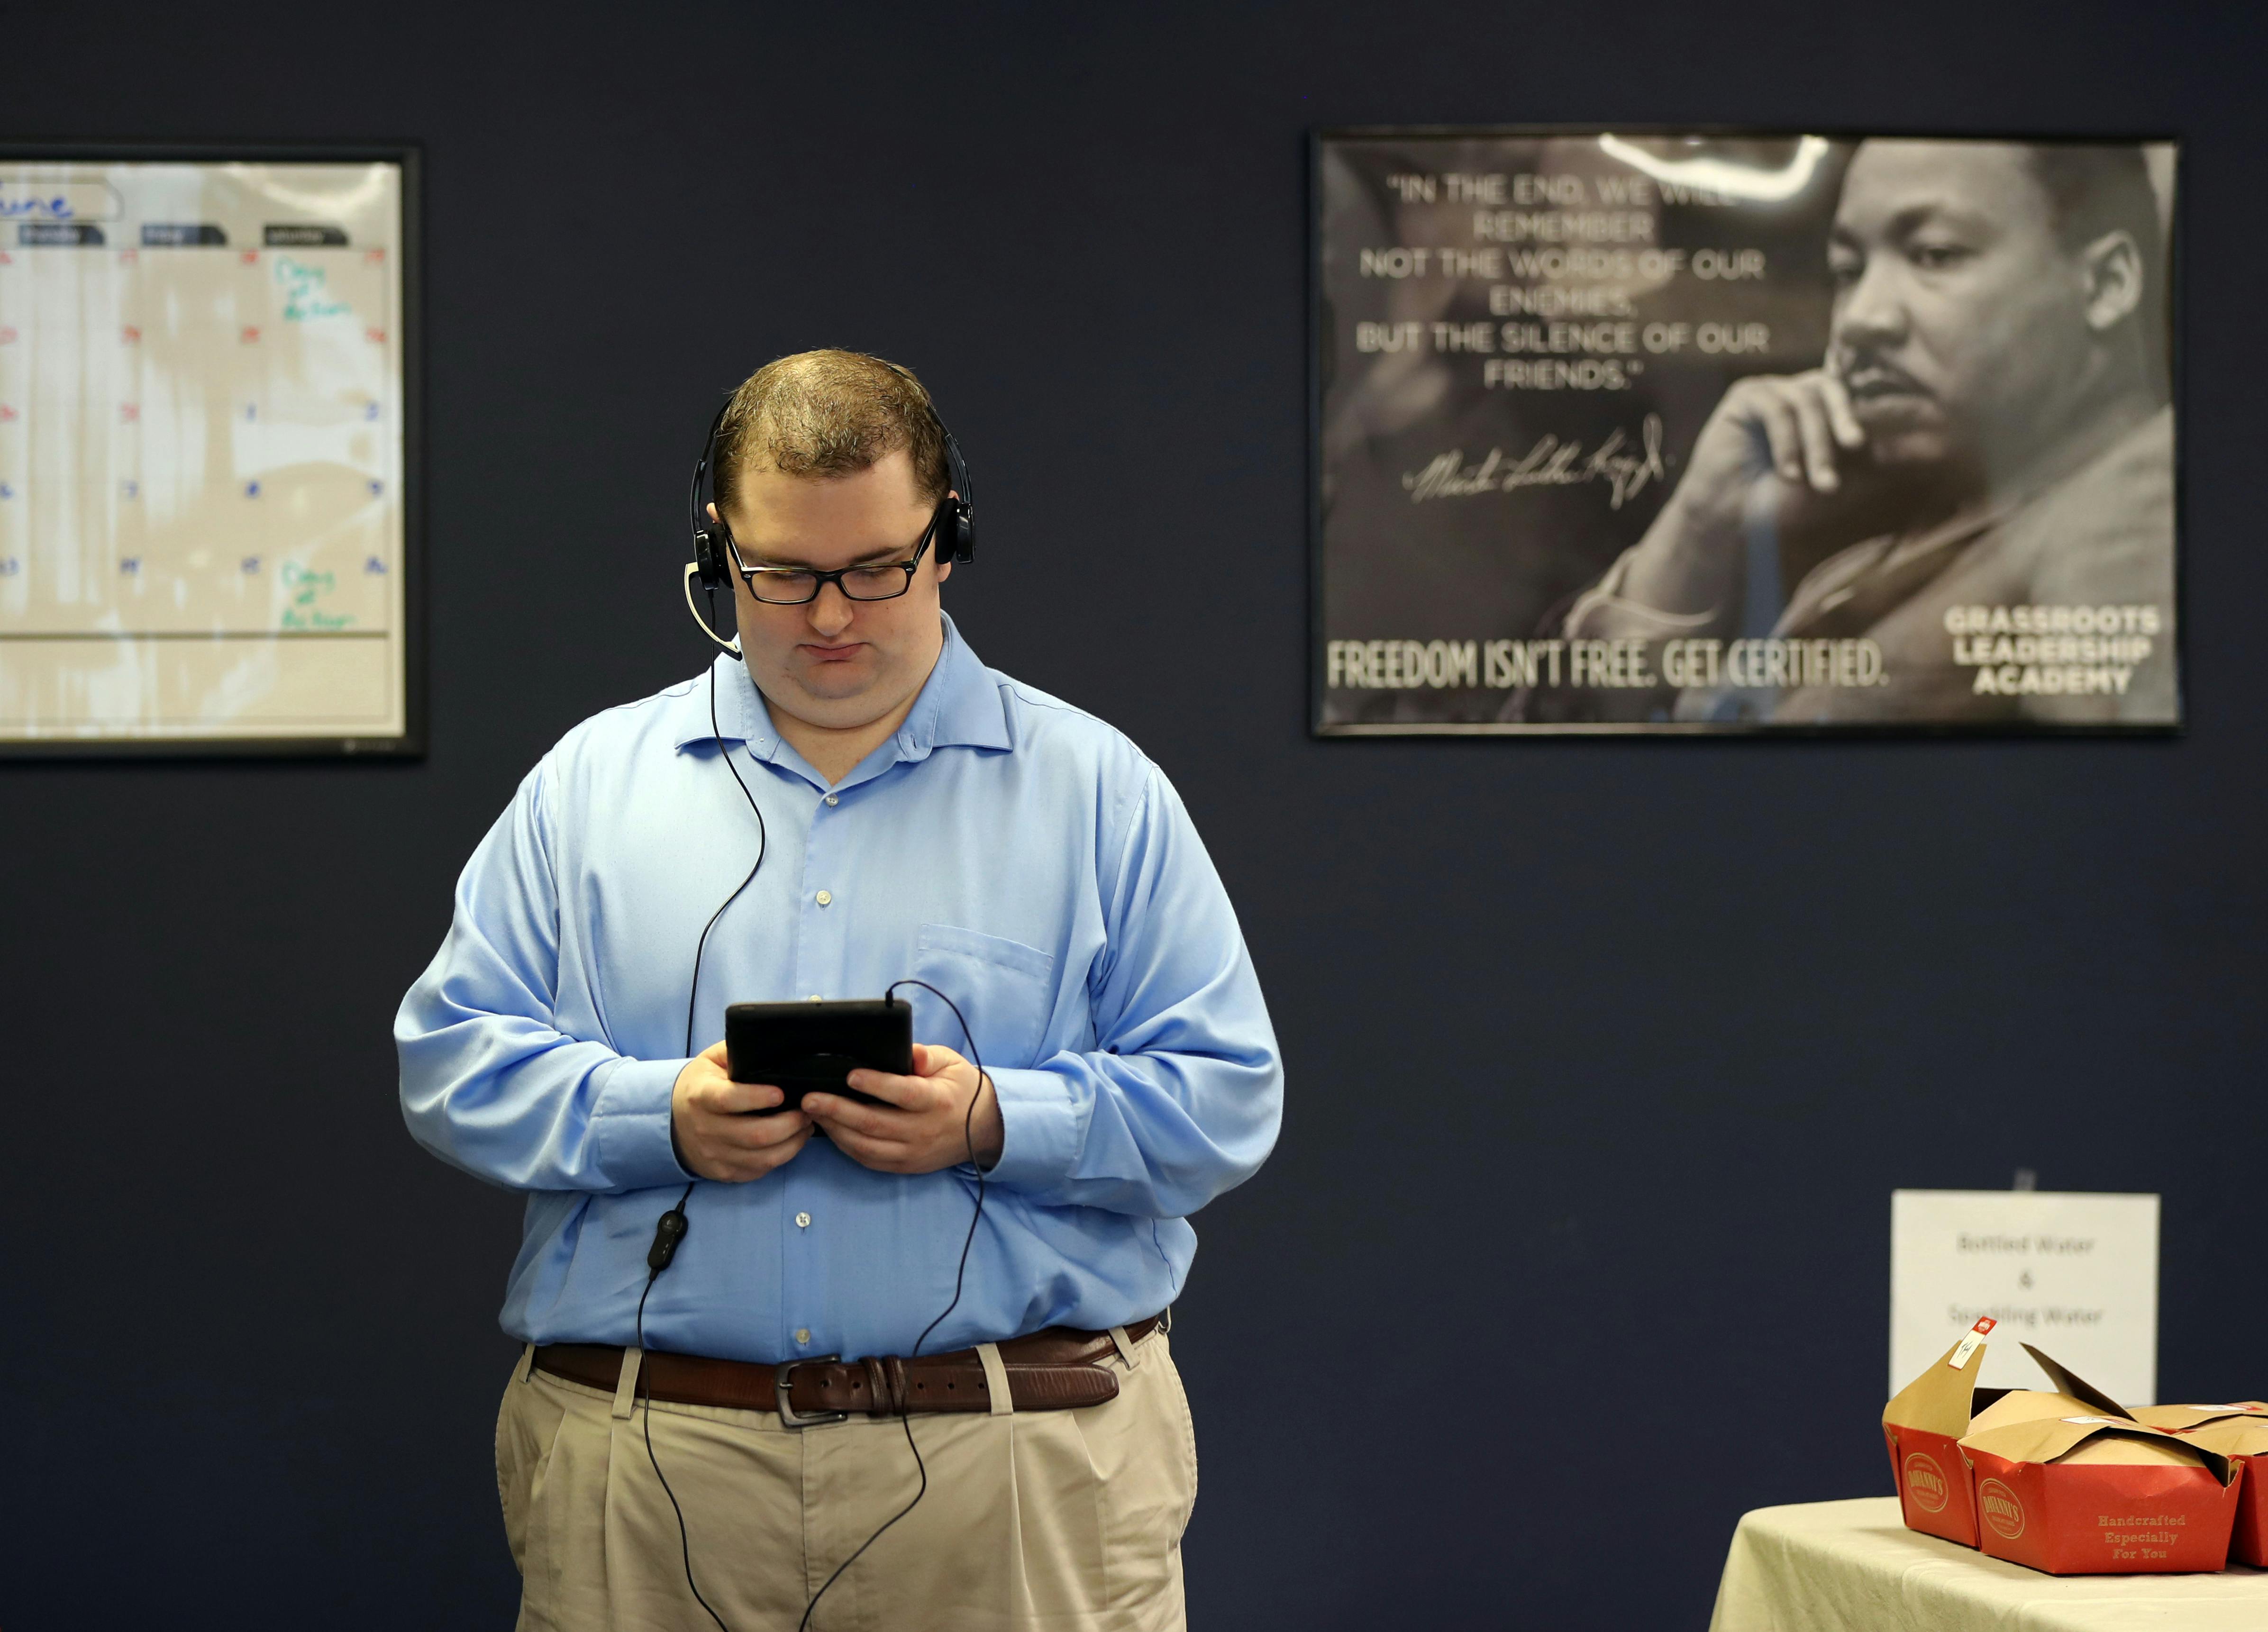 Inside the offices of Americans For Prosperity in Burnsville, people were busy making phone calls to Minnesotans to inquire about their opinions on topics like the recently passed tax bill and potential changes to Medicaid. Pat Kaluza from Lakeville made calls to Minnesotans through his handheld device.